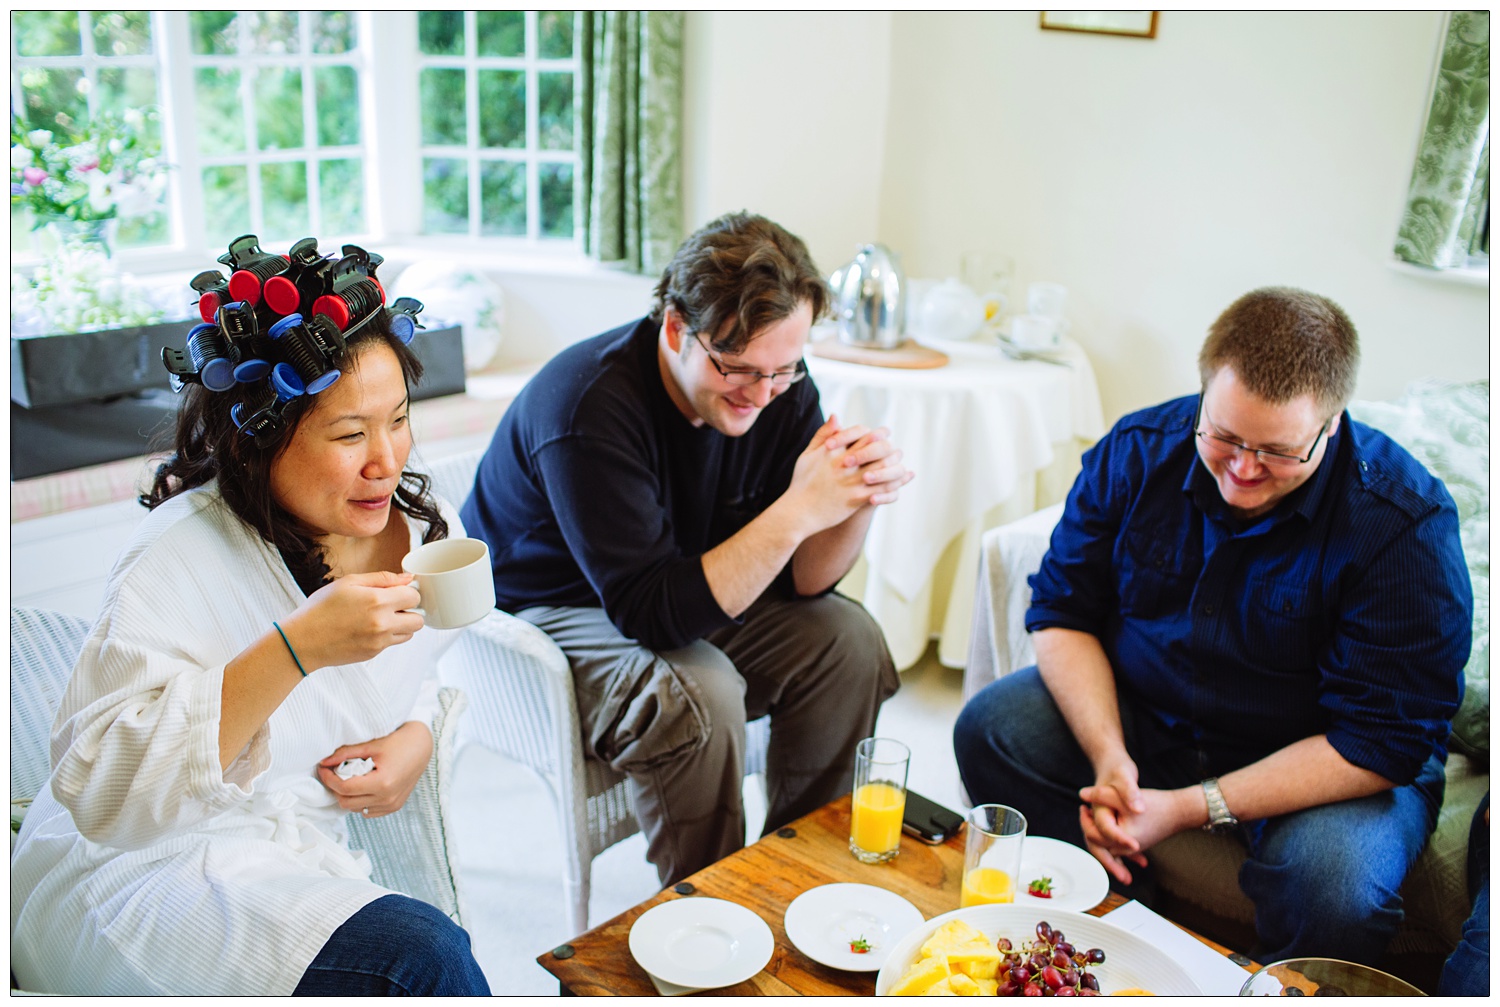 A woman in rollers drinking tea with friends. They are in the living room of the Hedingham castle garden cottage.